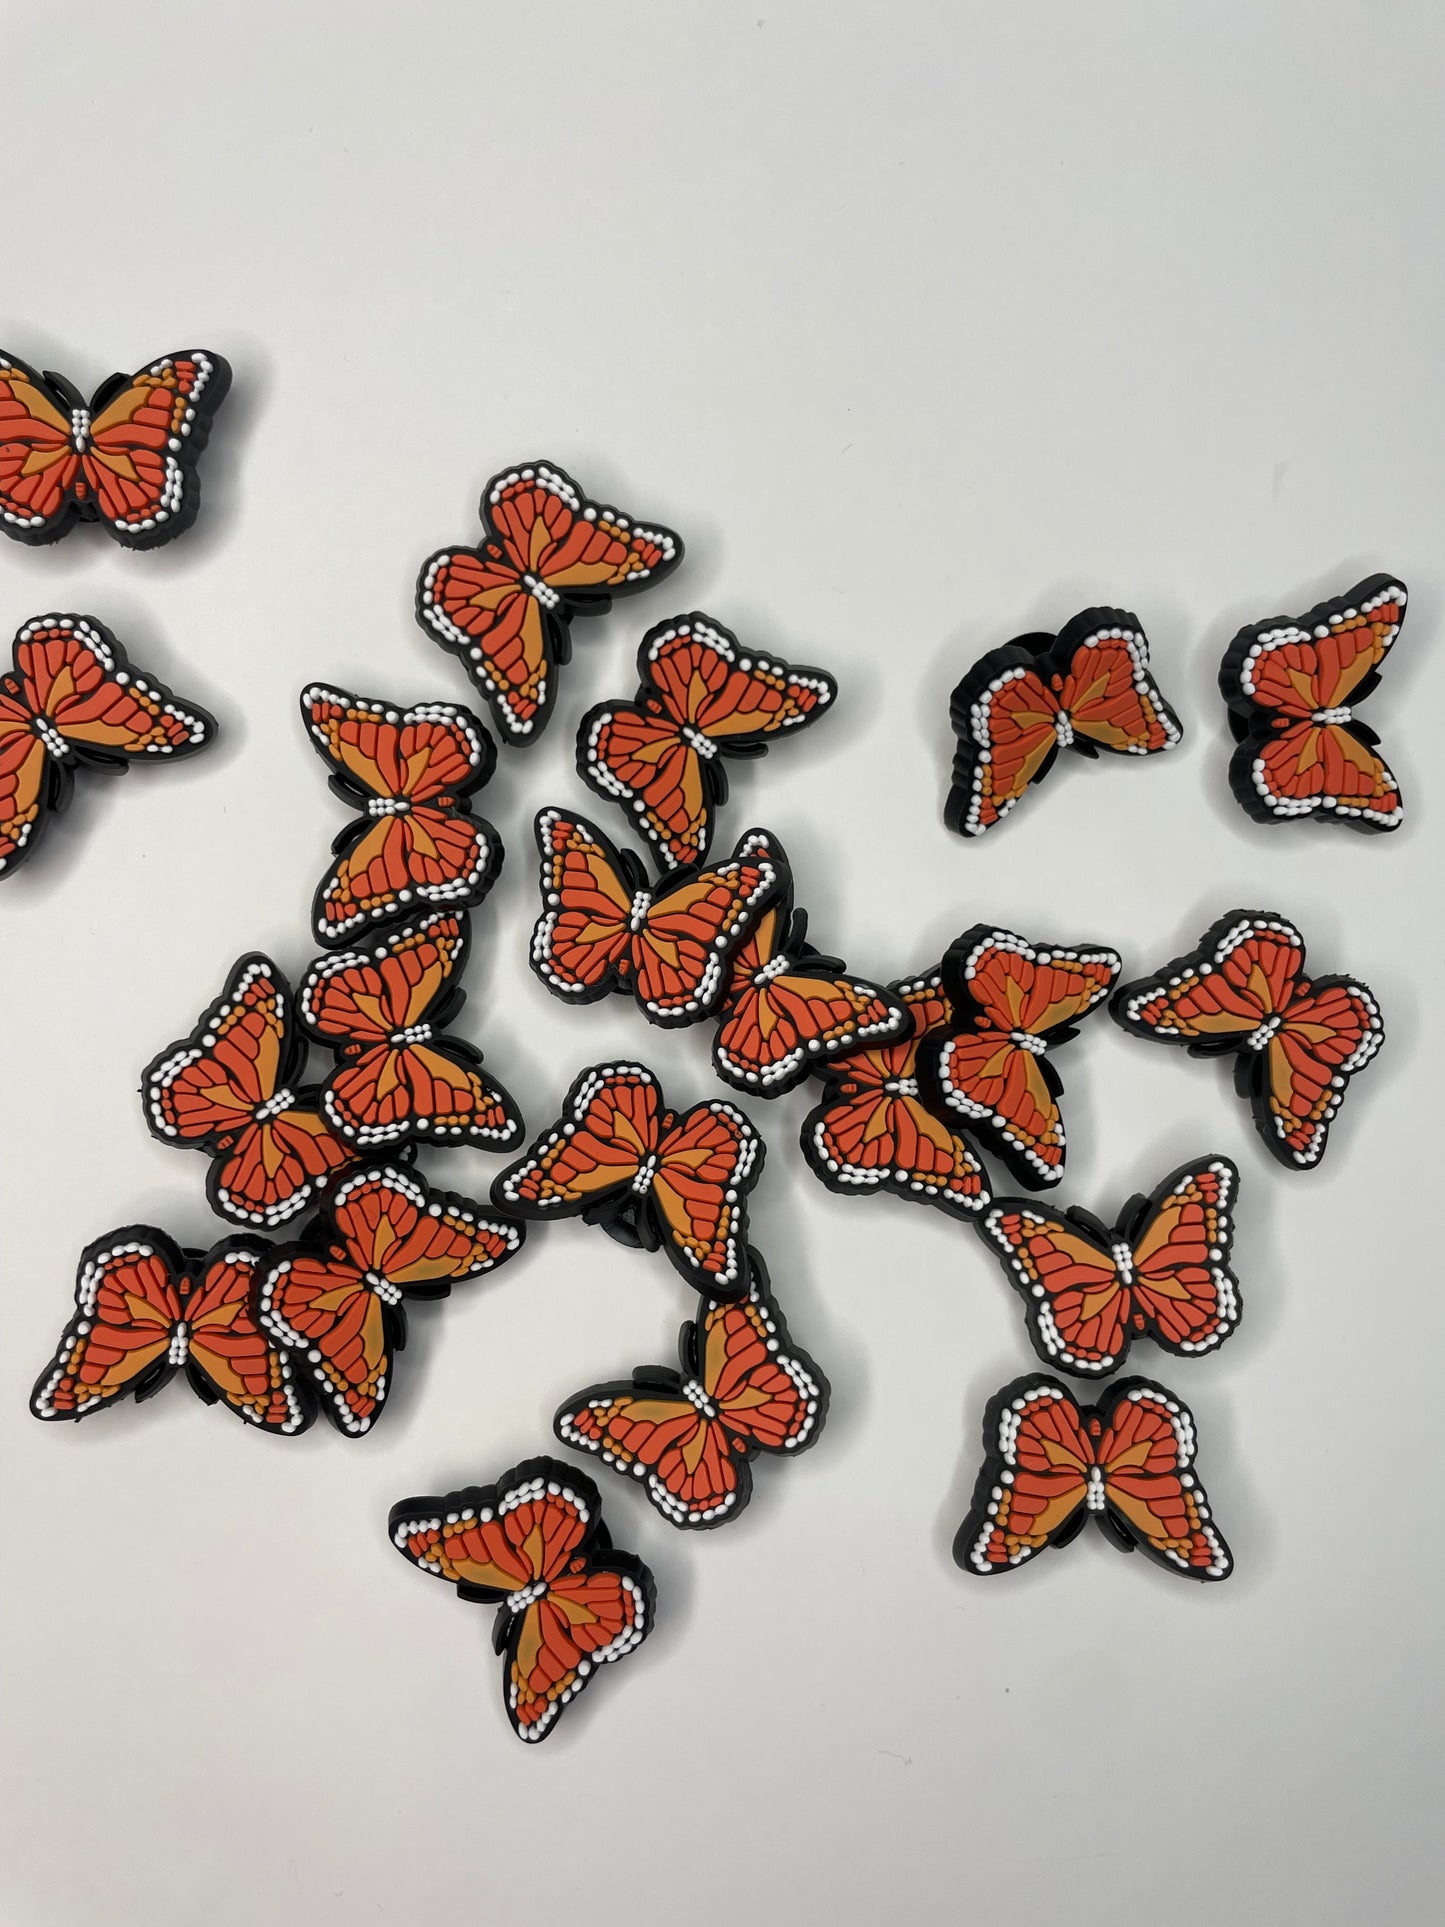 Butterfly Charms